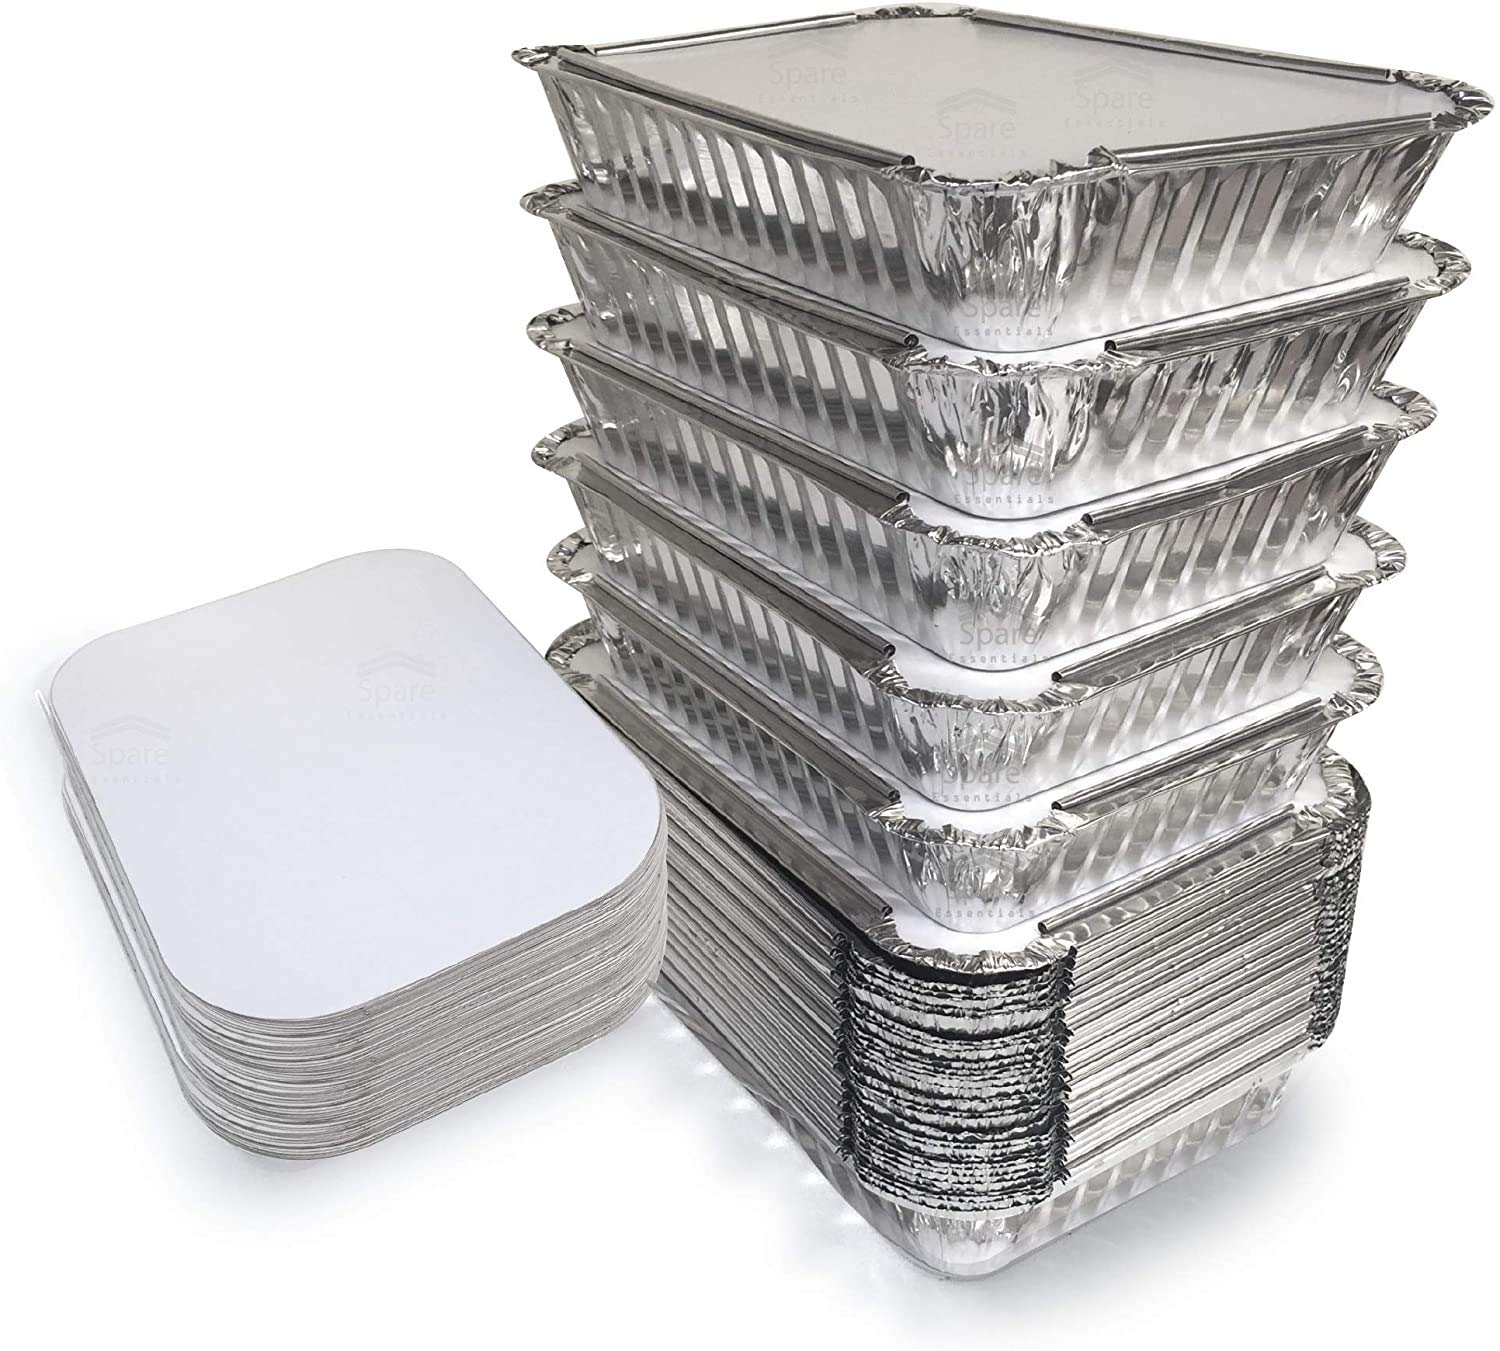 Aluminum Foil Container and its Benefits